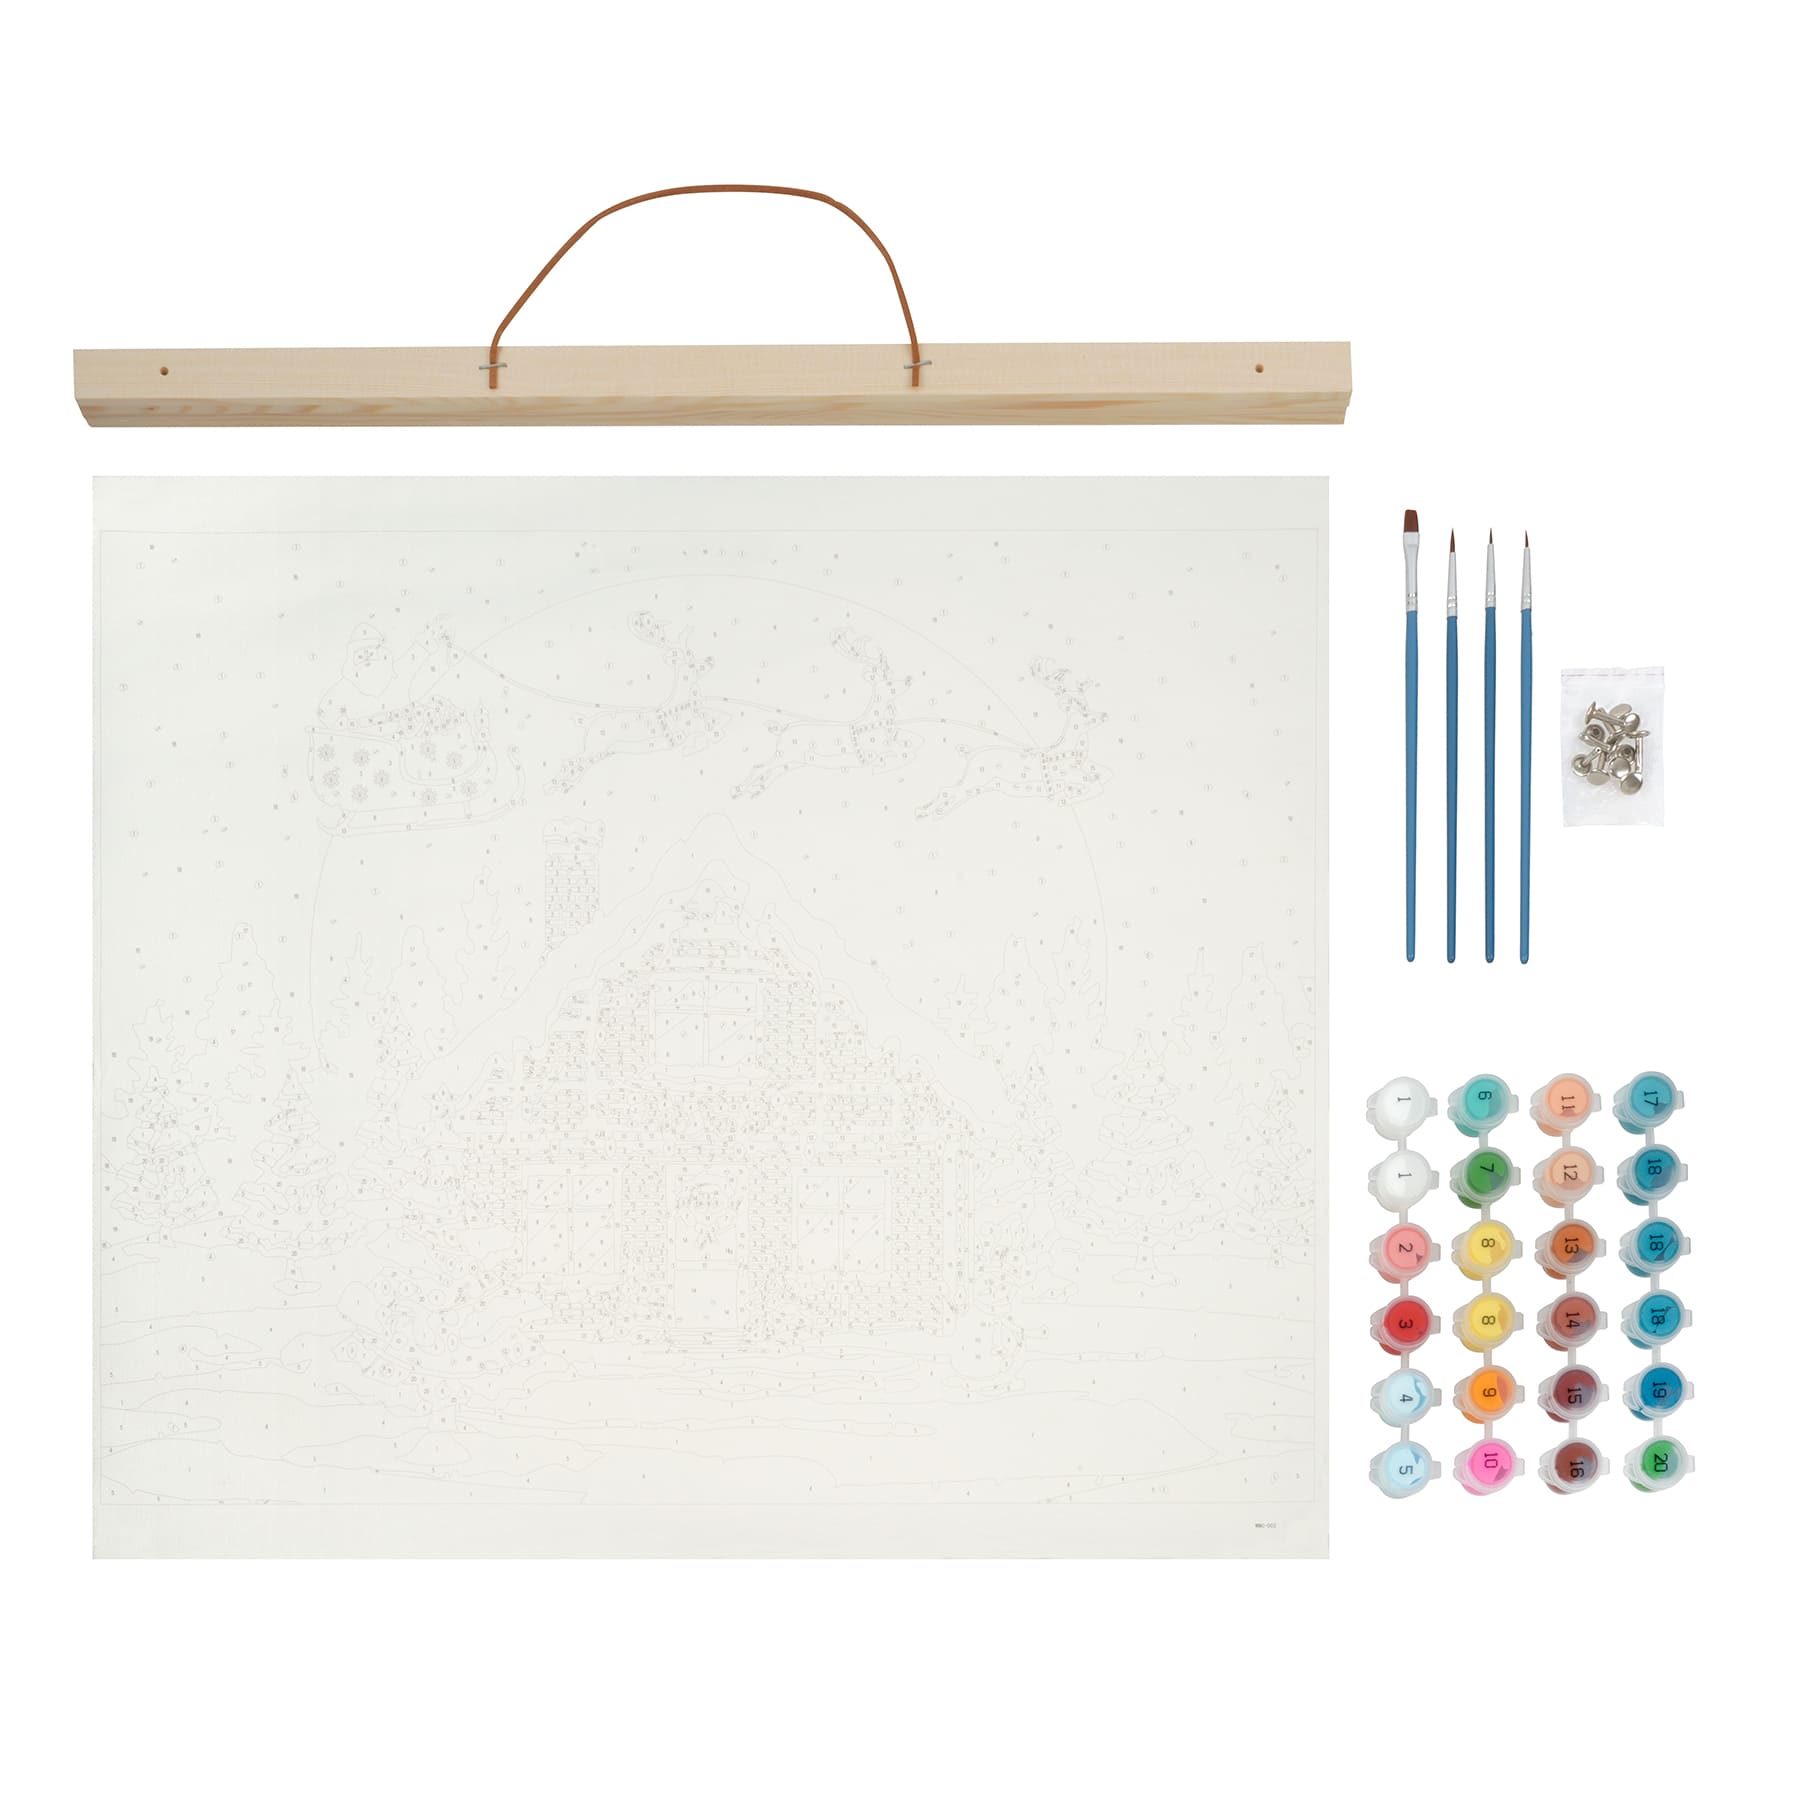 Very Mary Christmas Paint-by-Number Kit